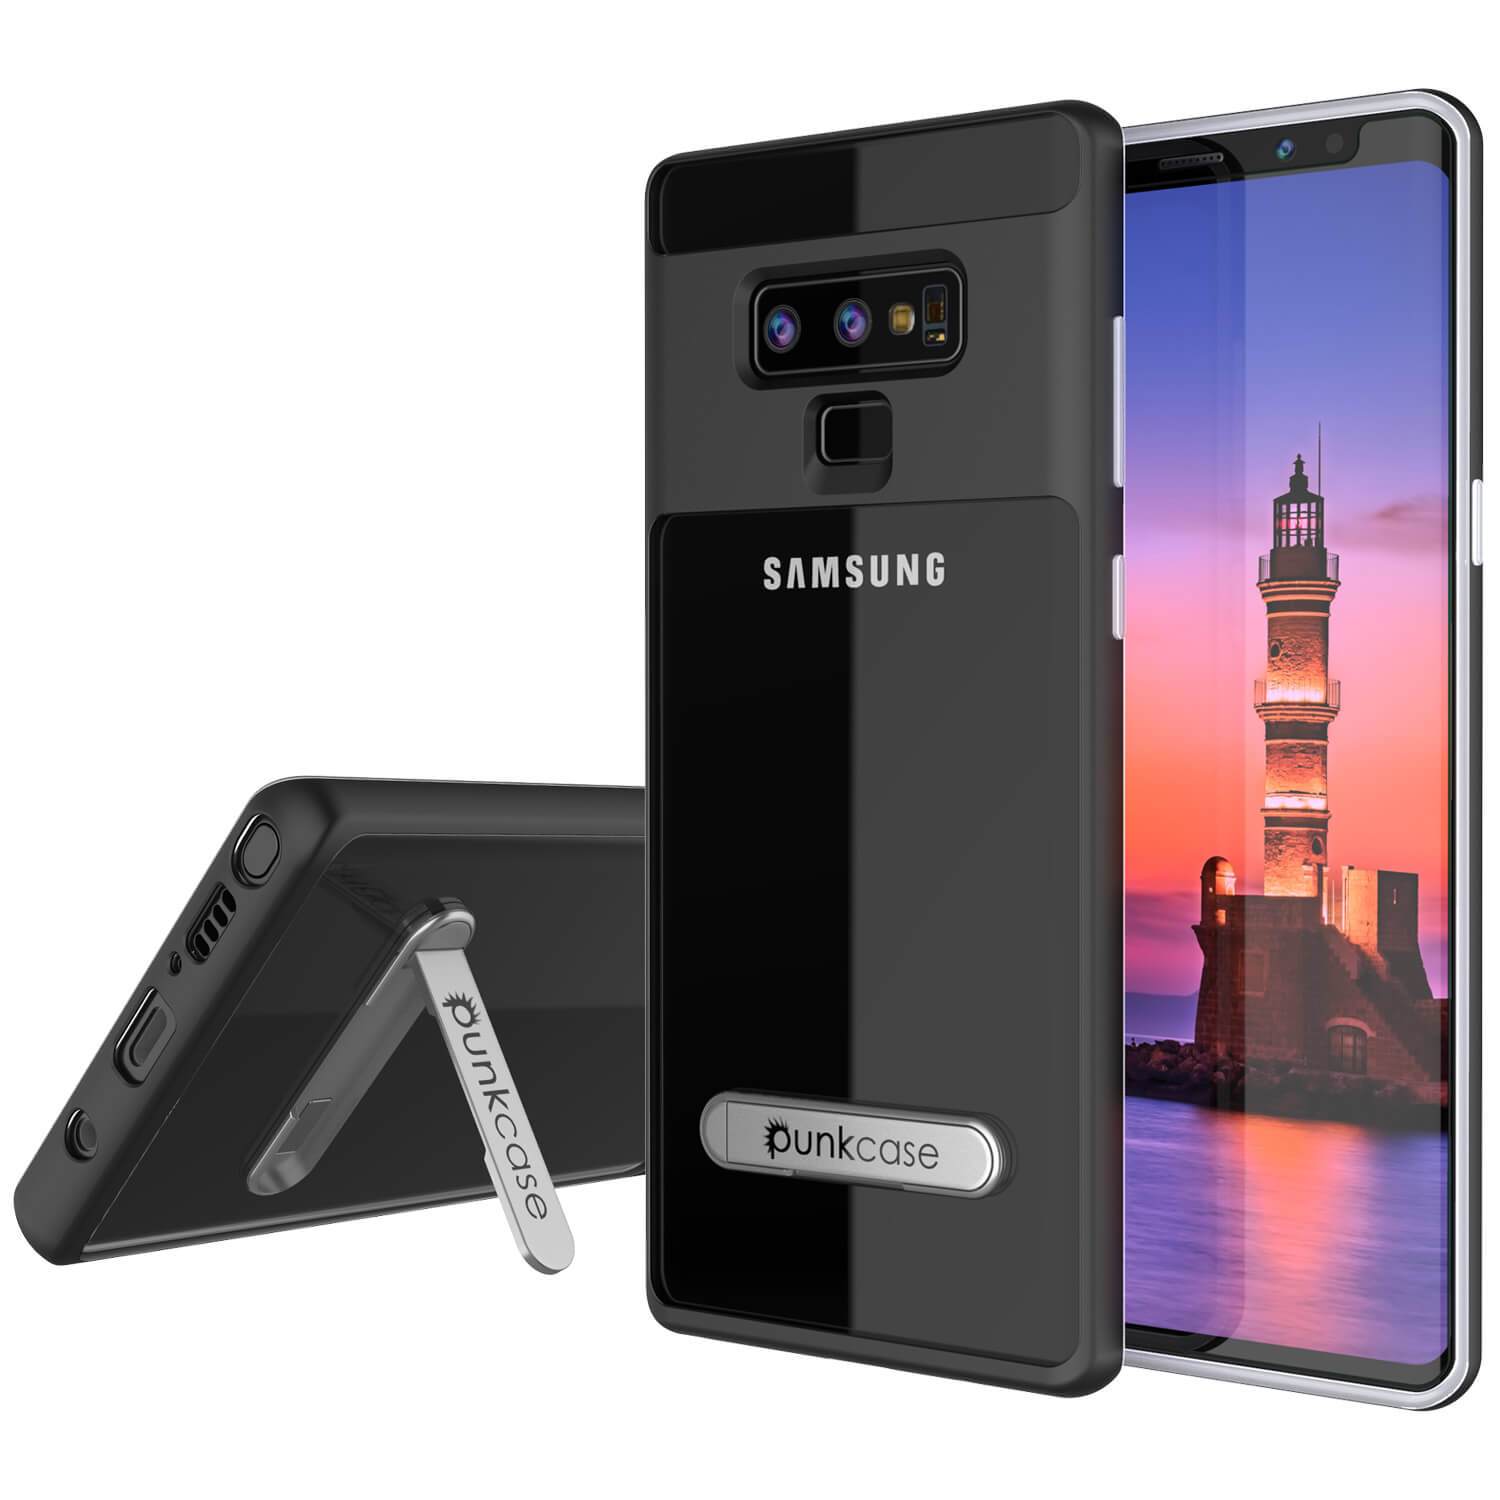 Galaxy Note 9 Lucid 3.0 PunkCase Armor Cover w/Integrated Kickstand and Screen Protector [Black]